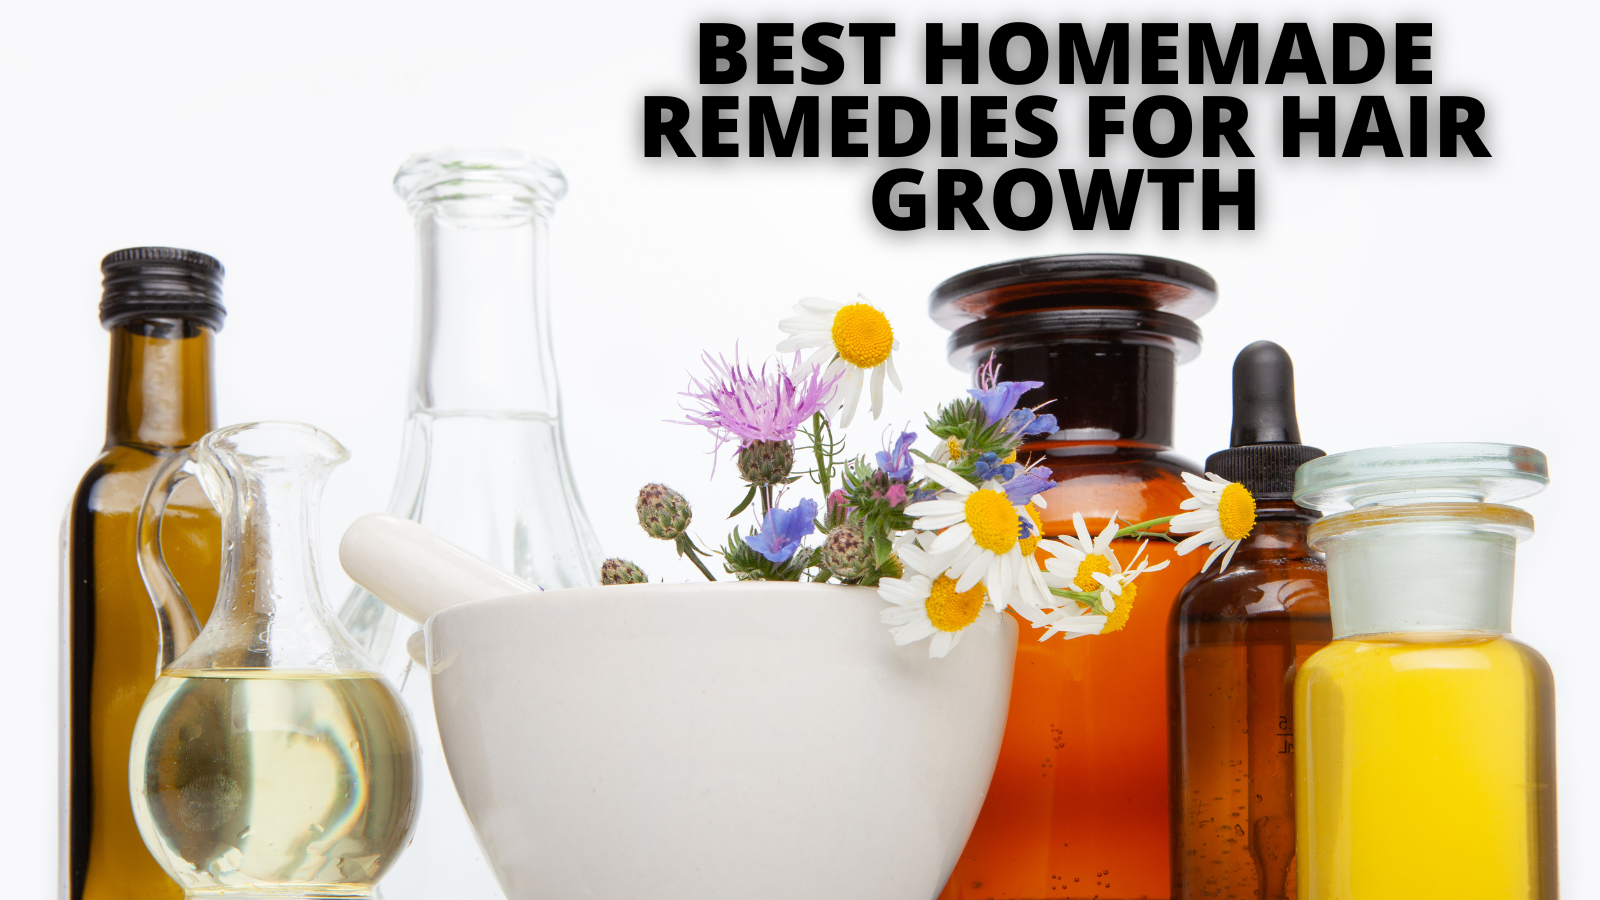 Best Homemade Remedies For Hair Growth